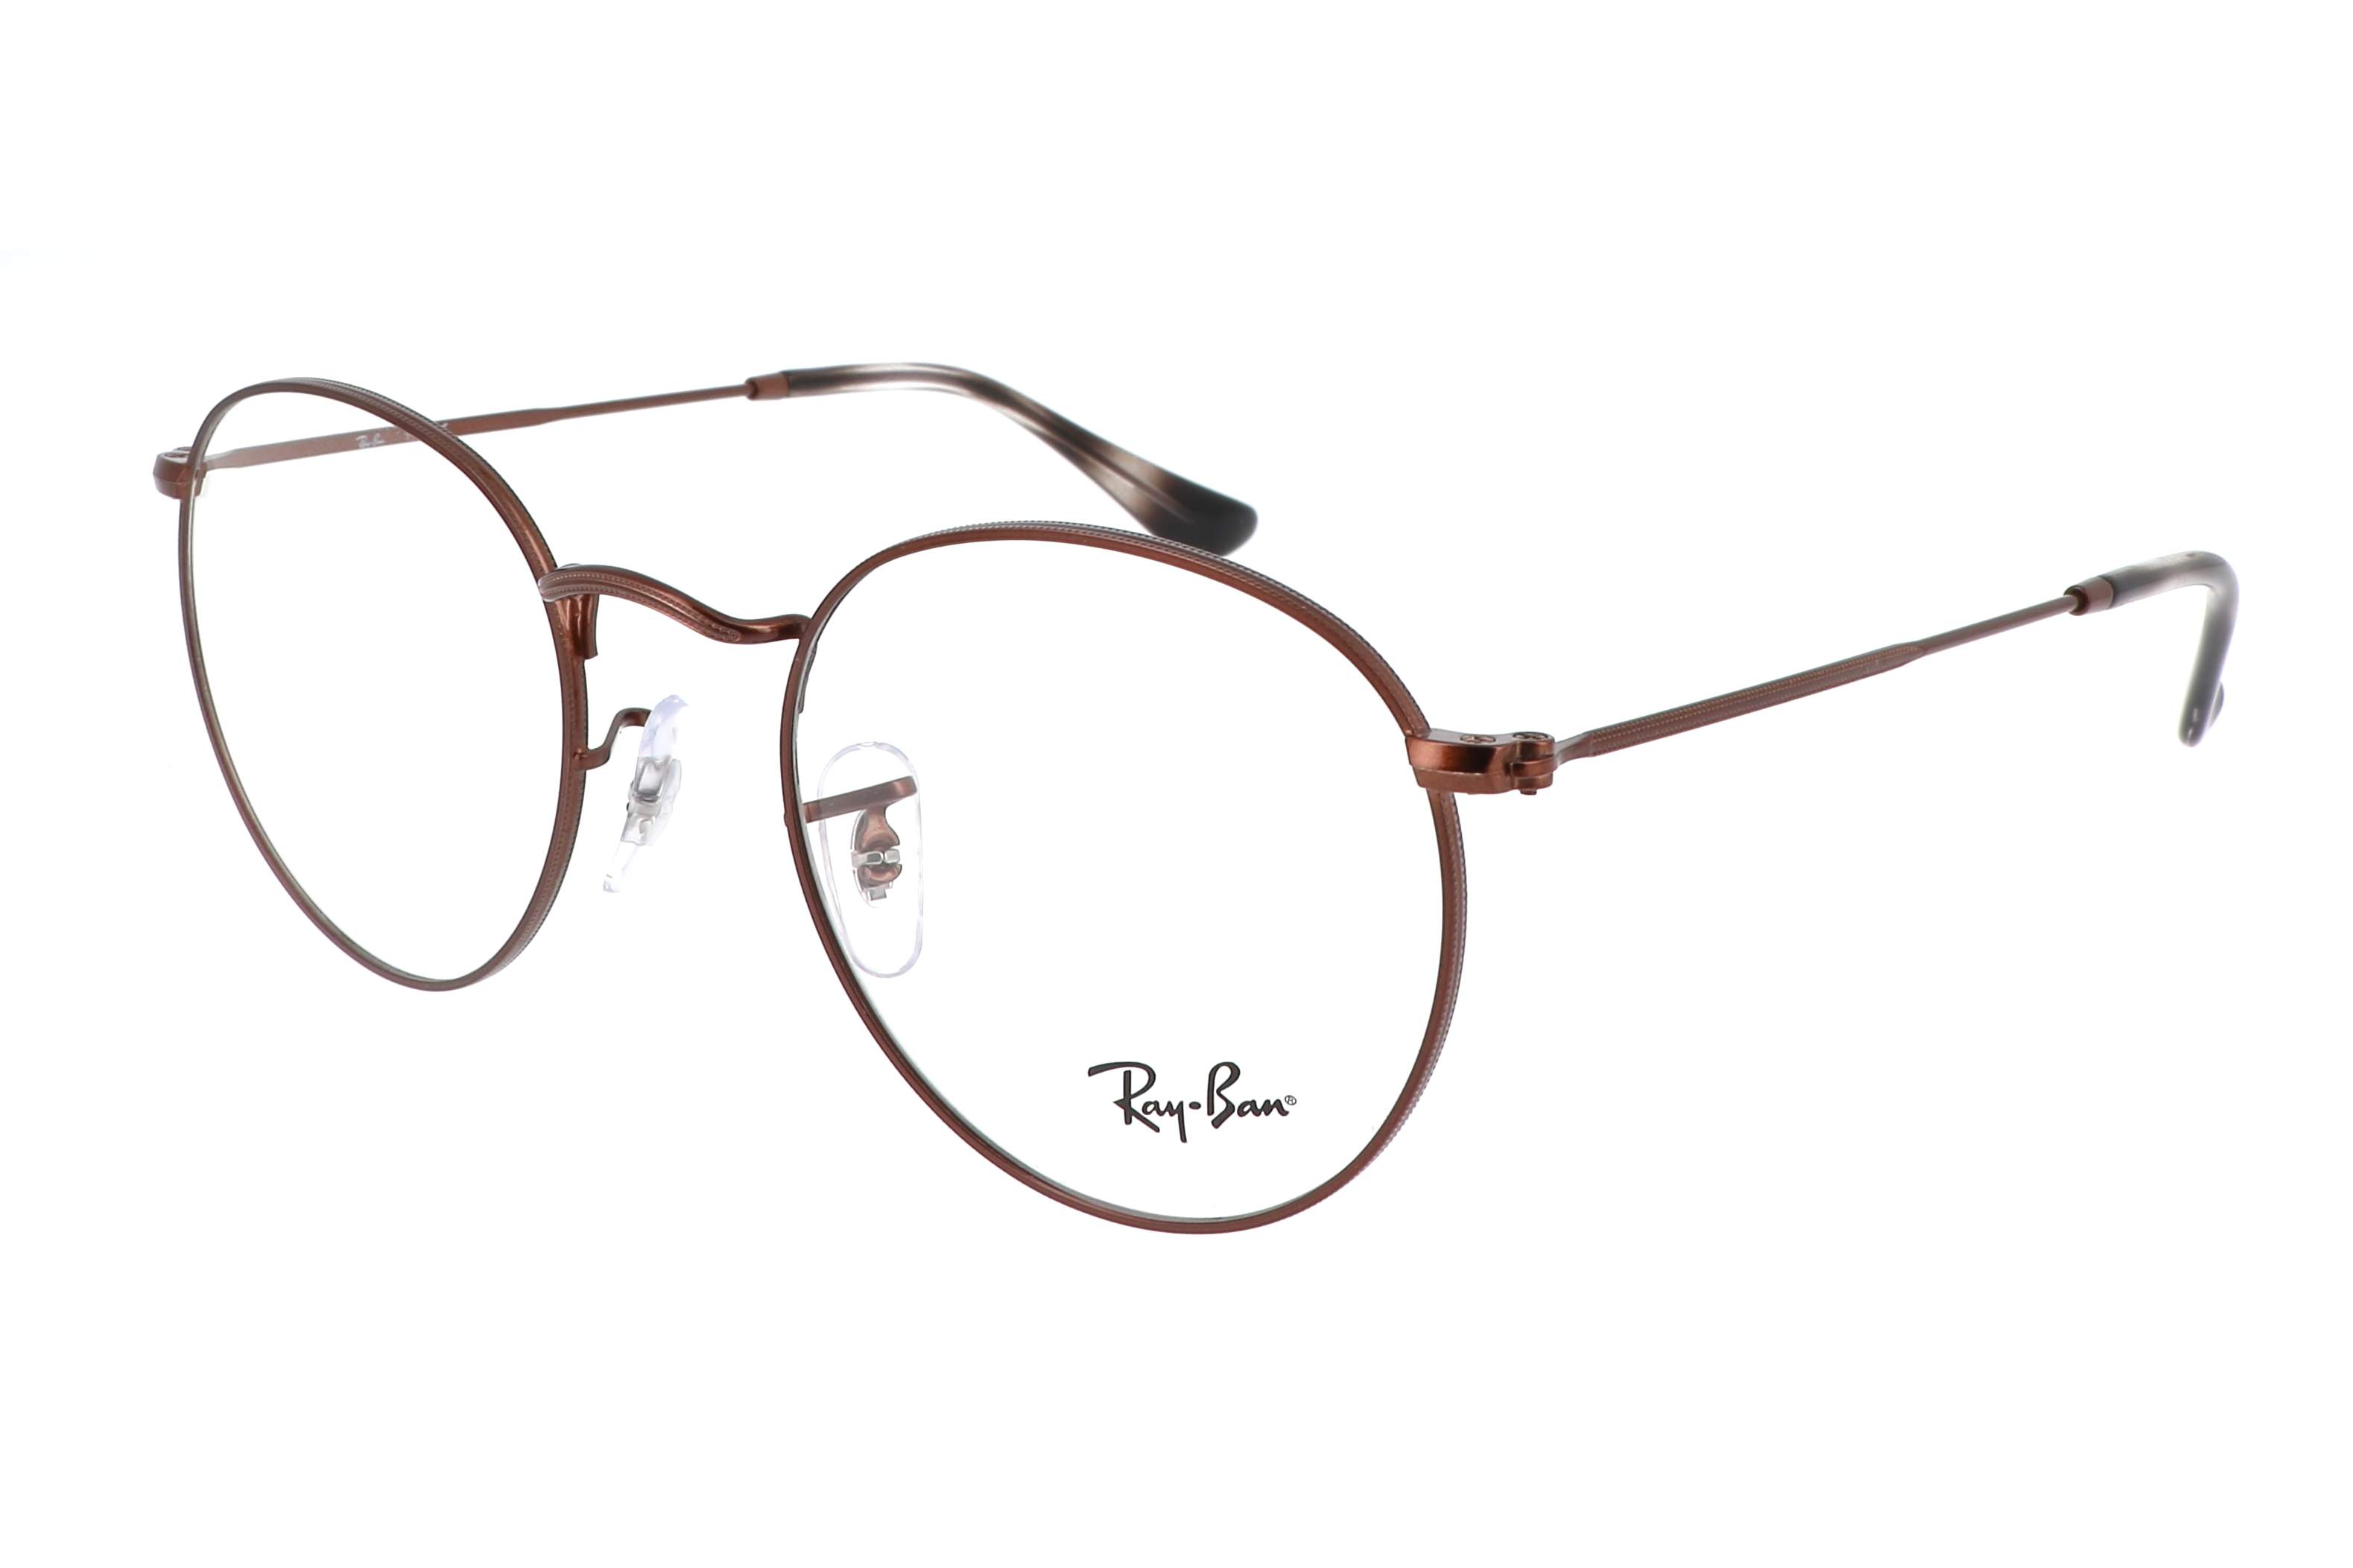 Ray Ban Round Frames Free Shipping Off79 In Stock